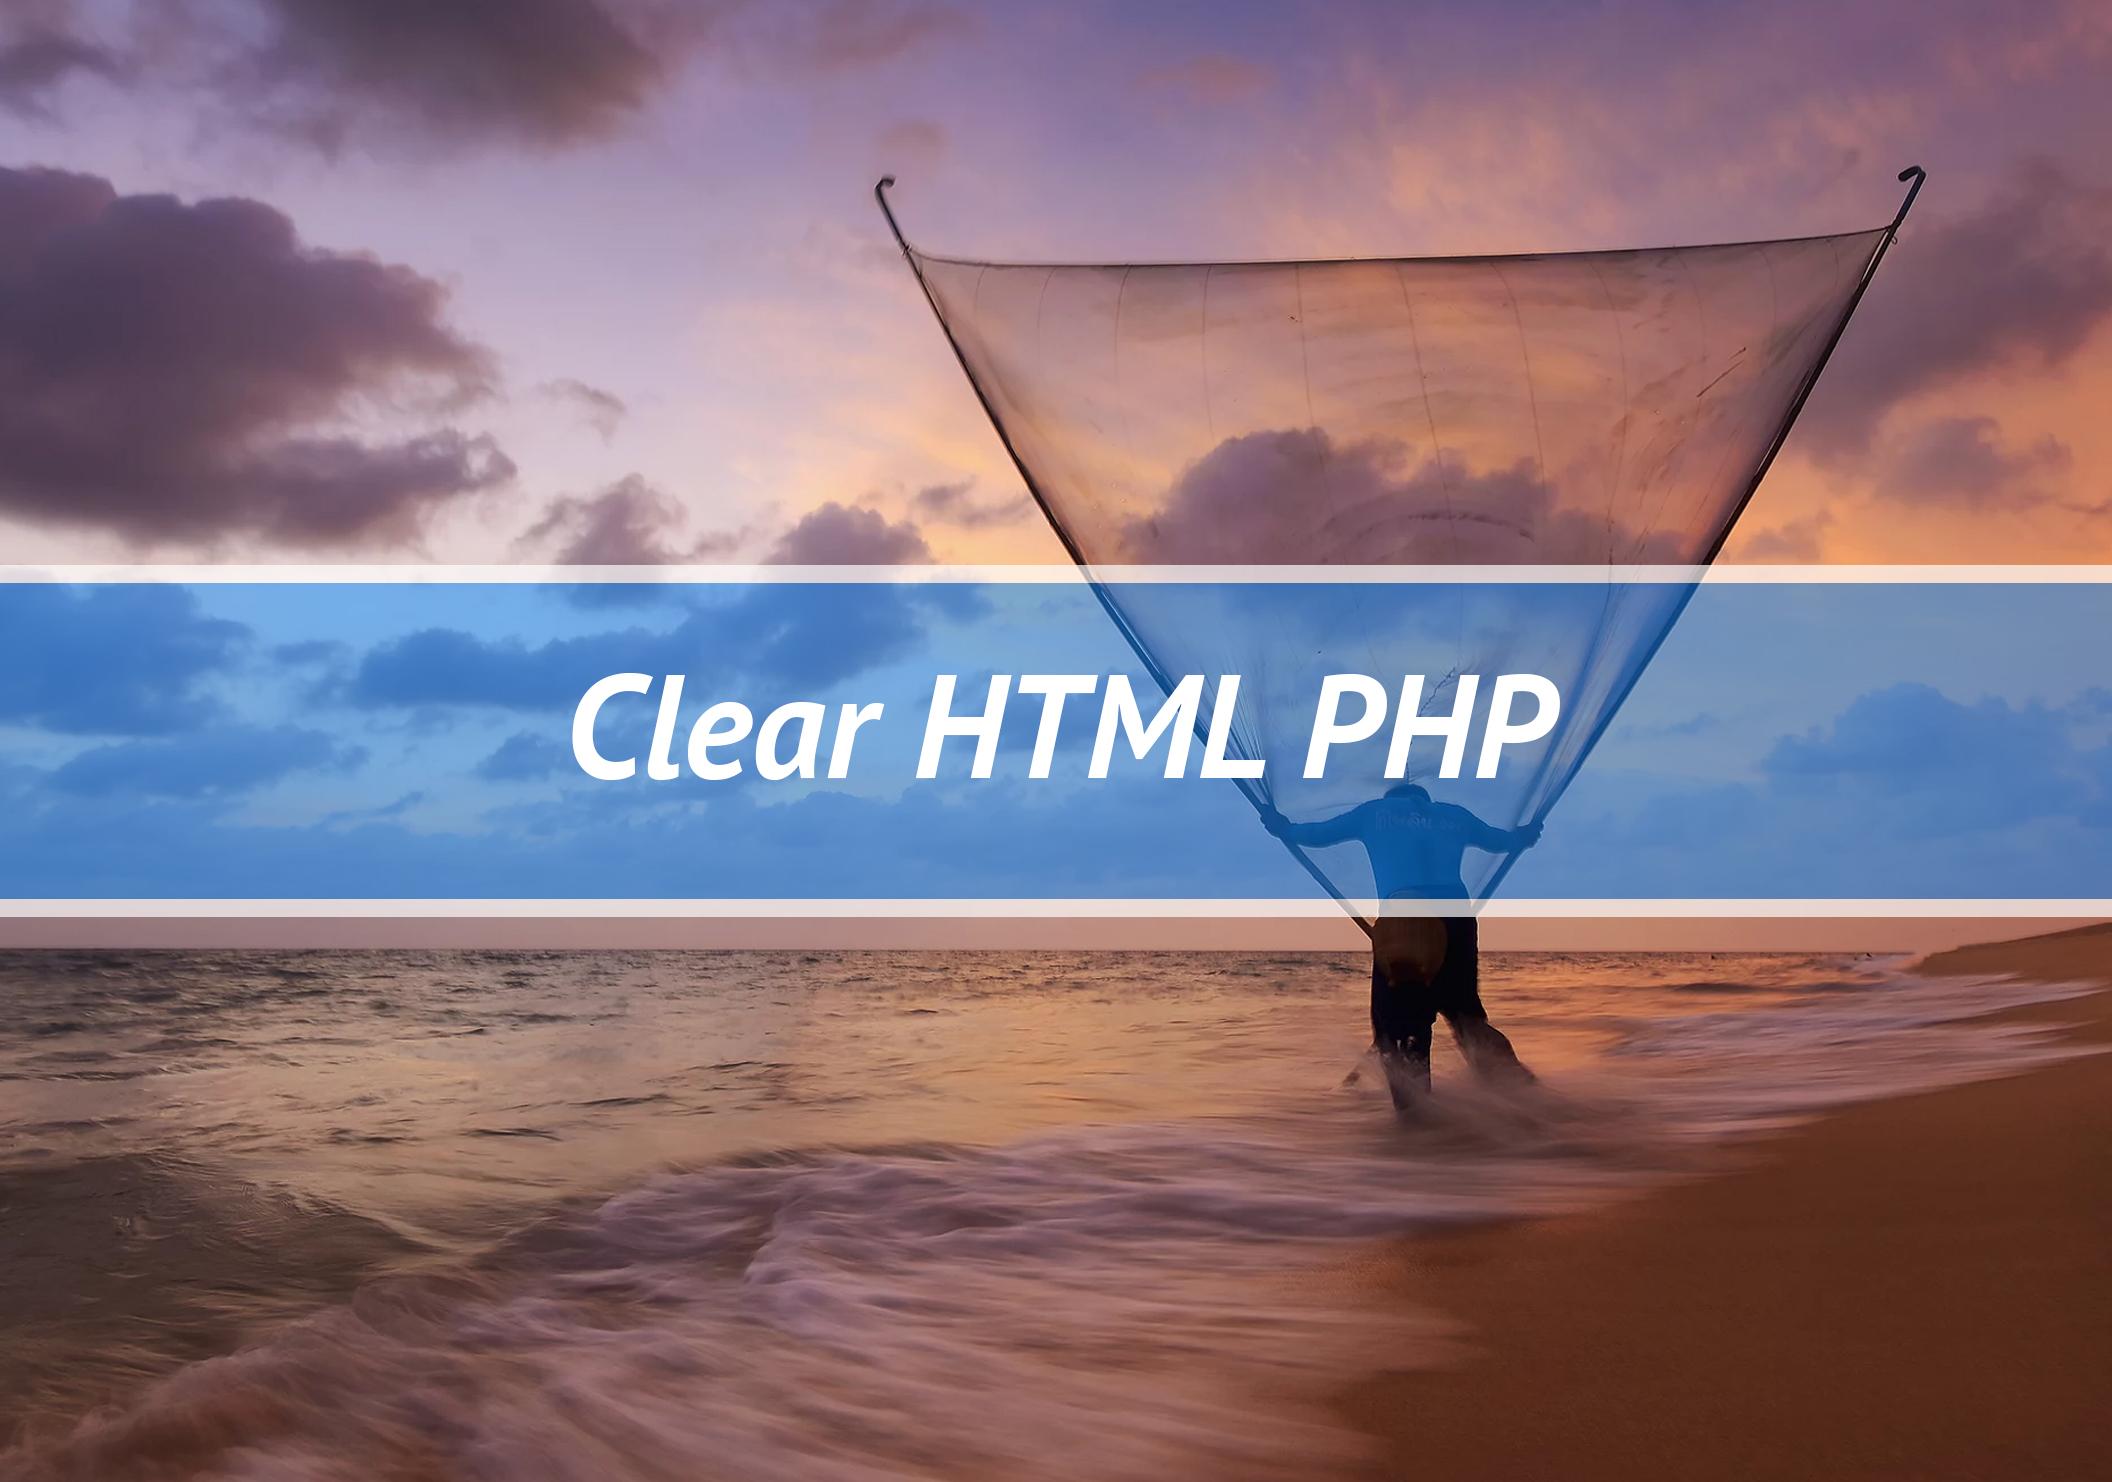 Clear HTML PHP